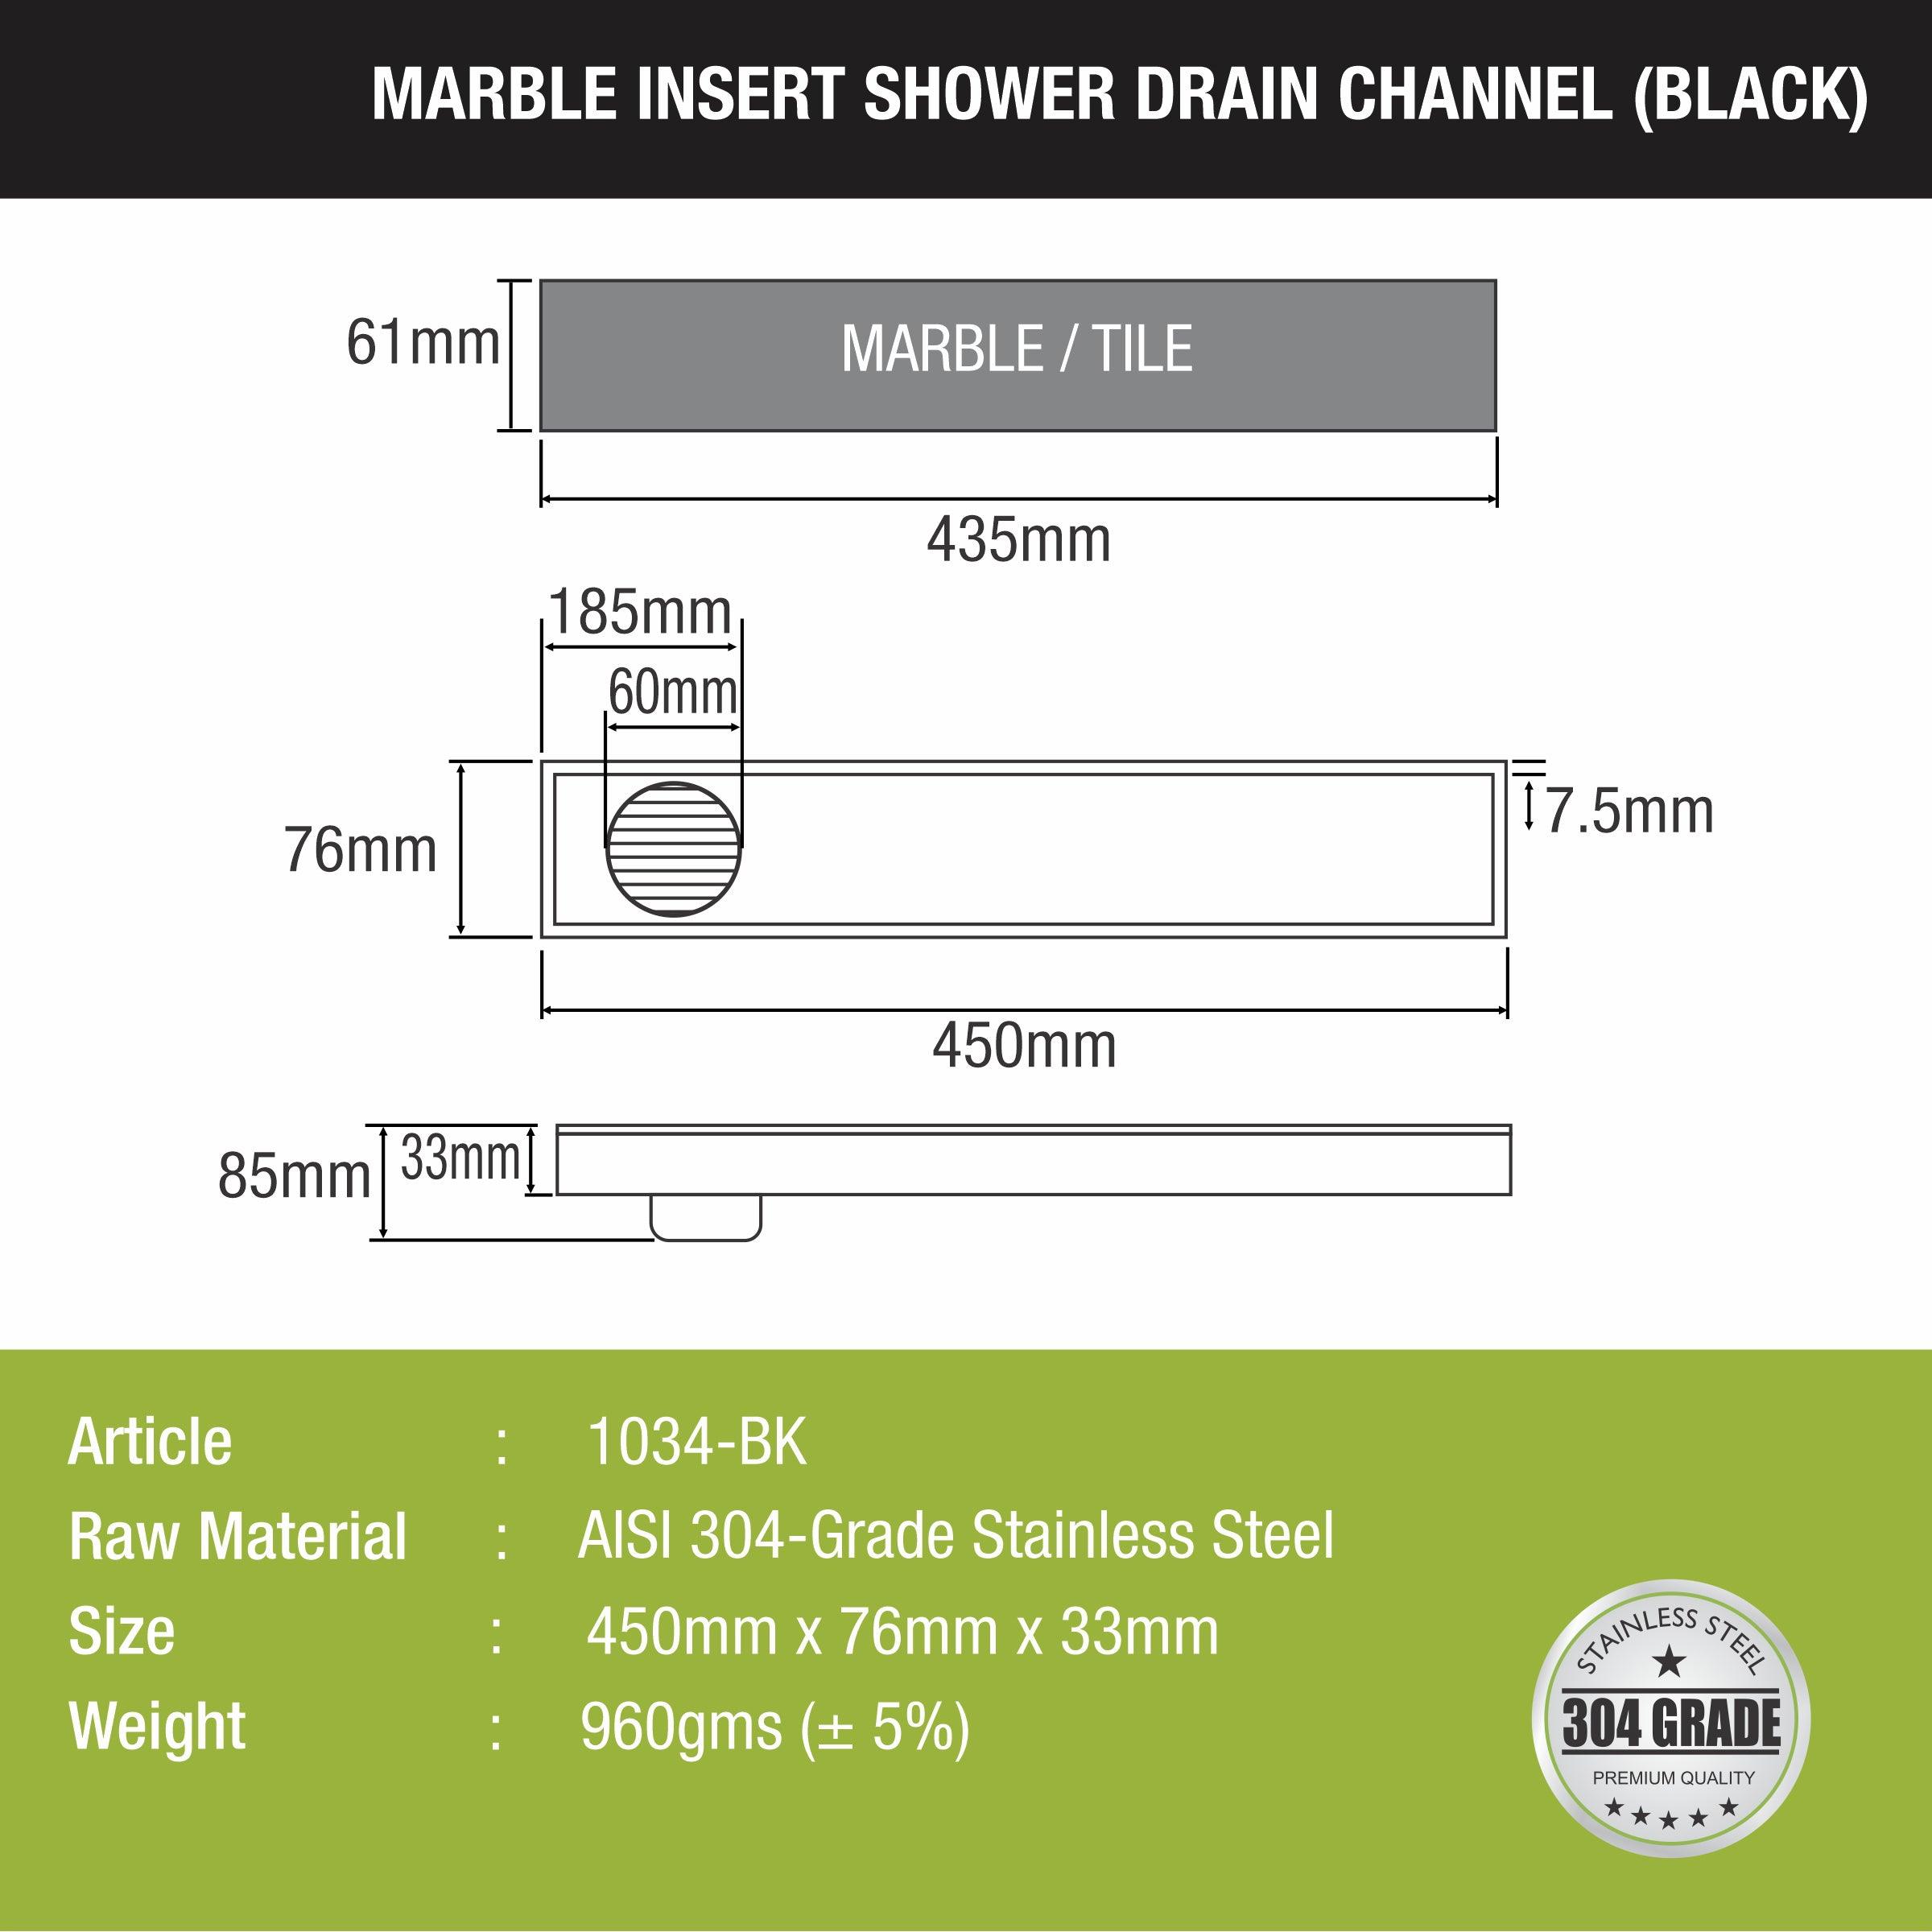 Marble Insert Shower Drain Channel - Black (18 x 3 Inches) size and measurement